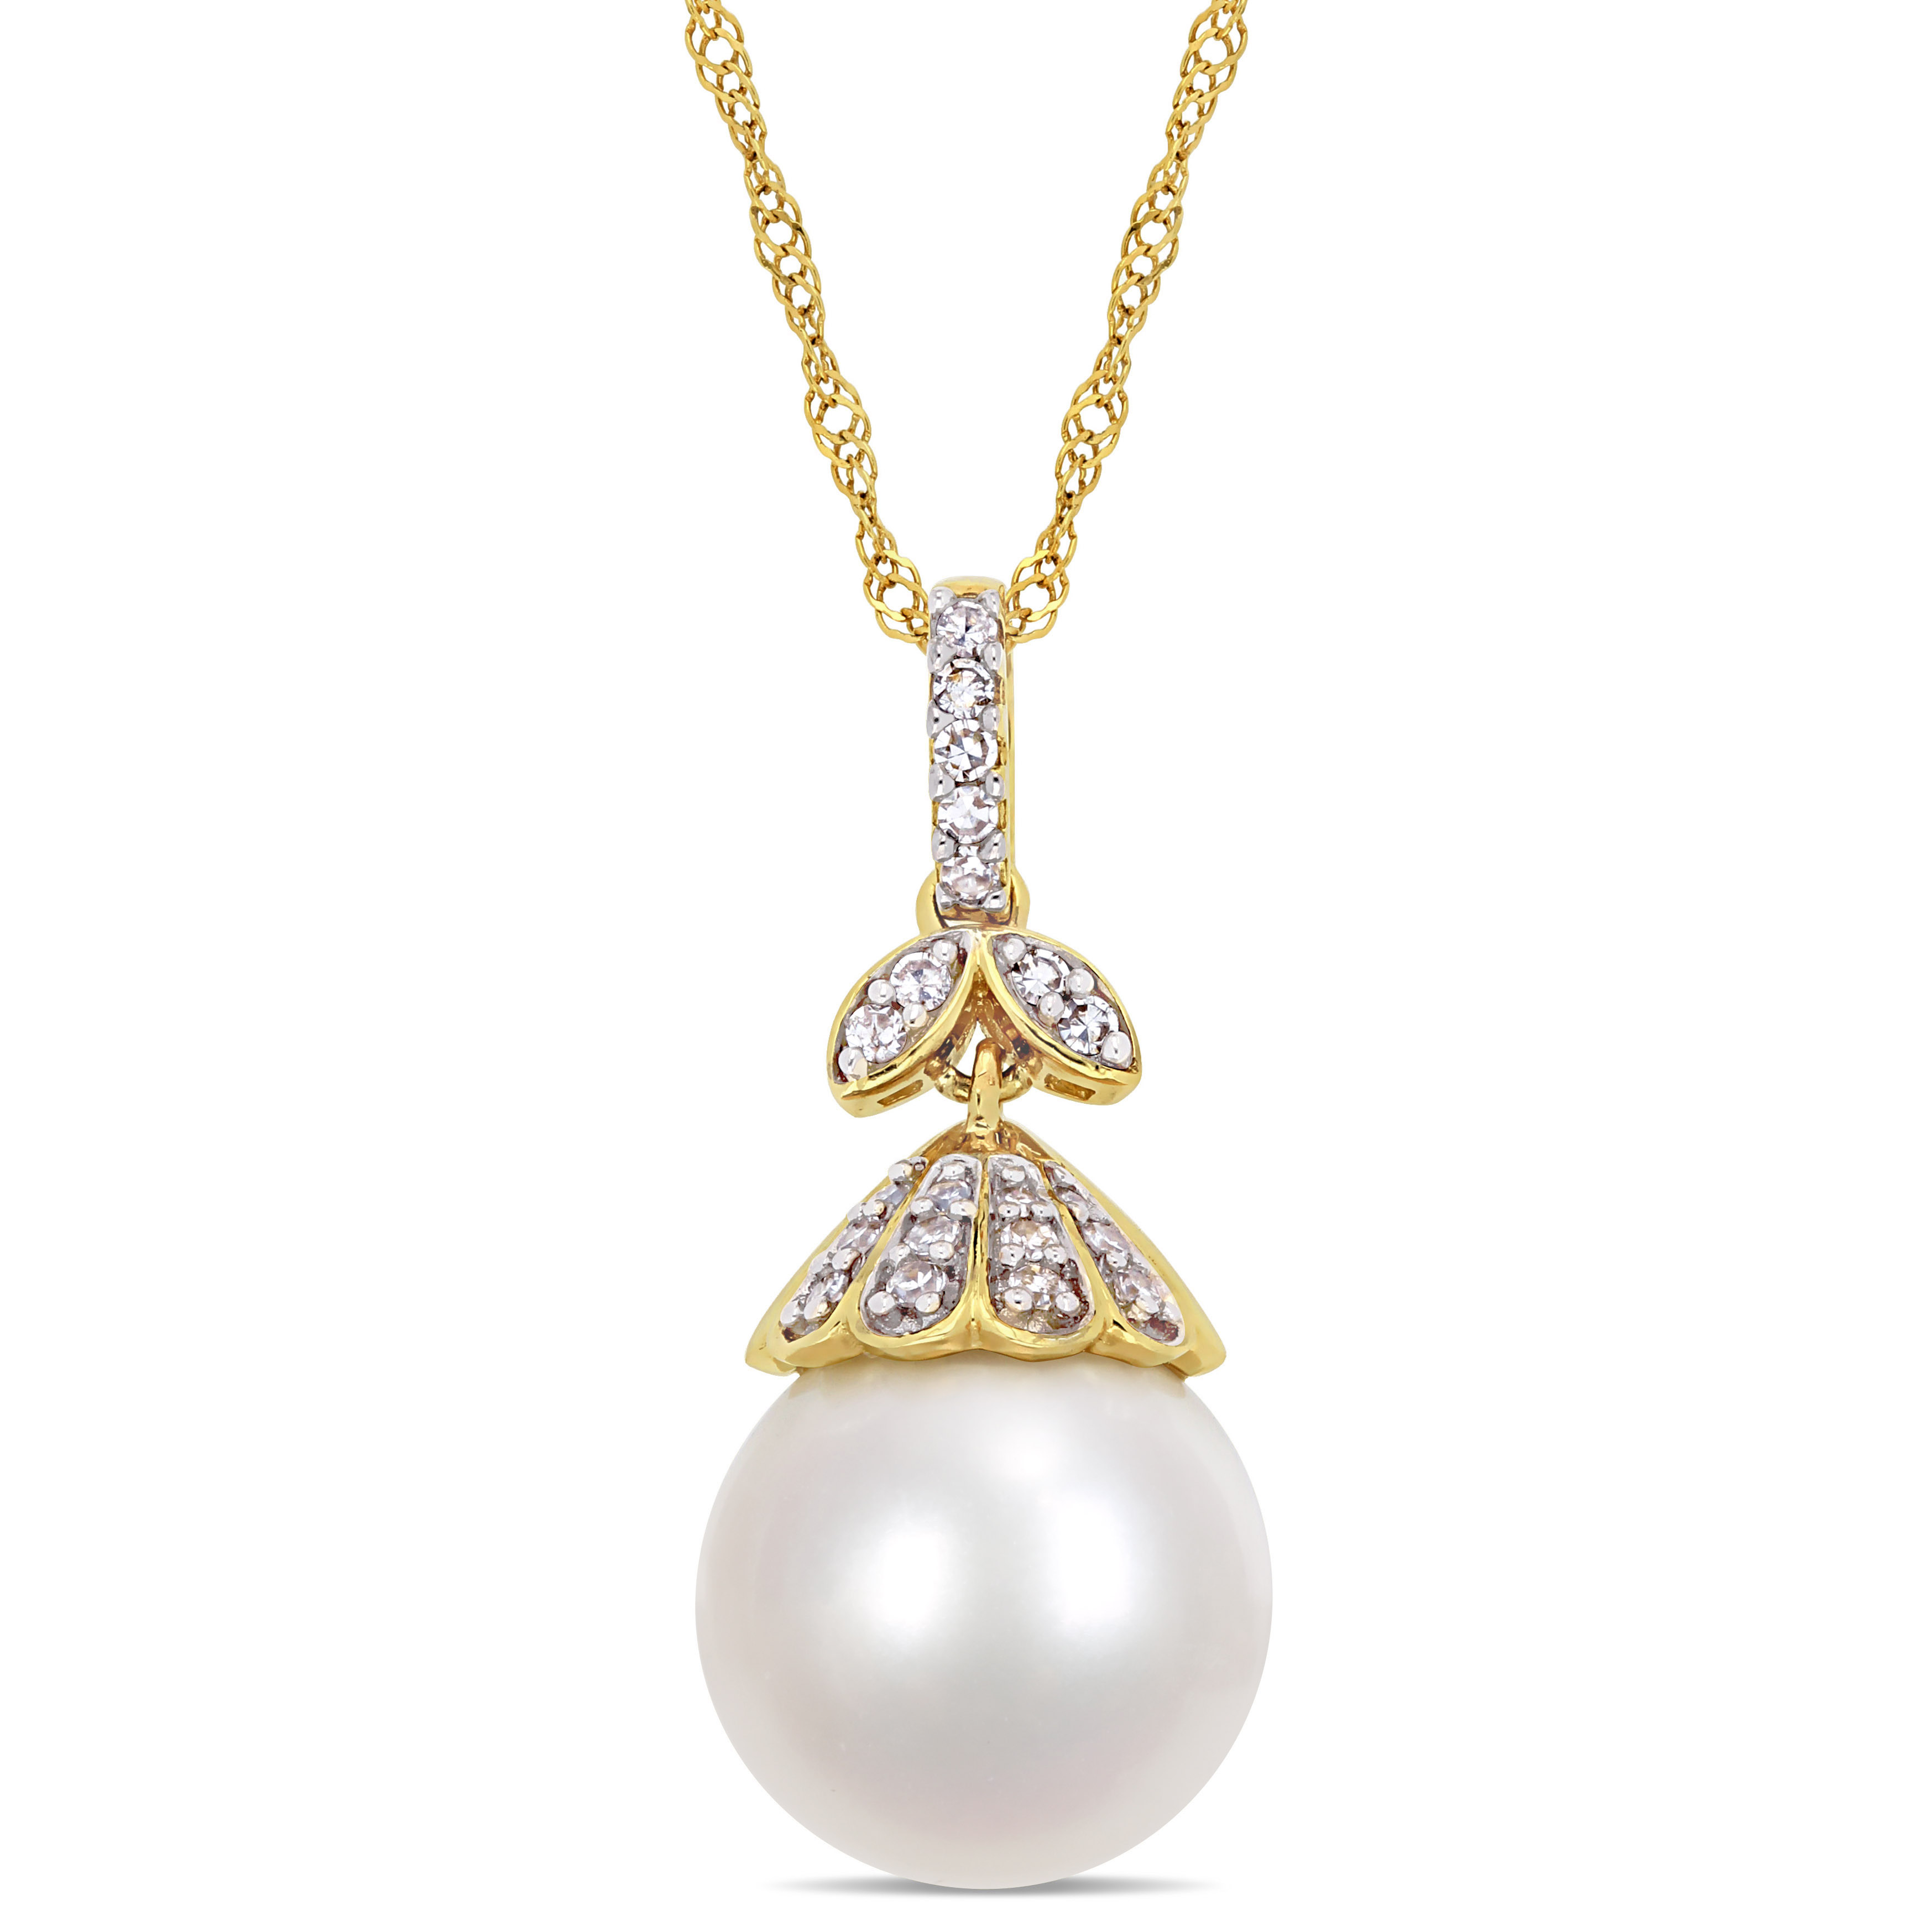 10-10.5 MM South Sea Pearl and 1/10 CT TW Diamond Floral Drop Pendant with Chain in 14k Yellow Gold